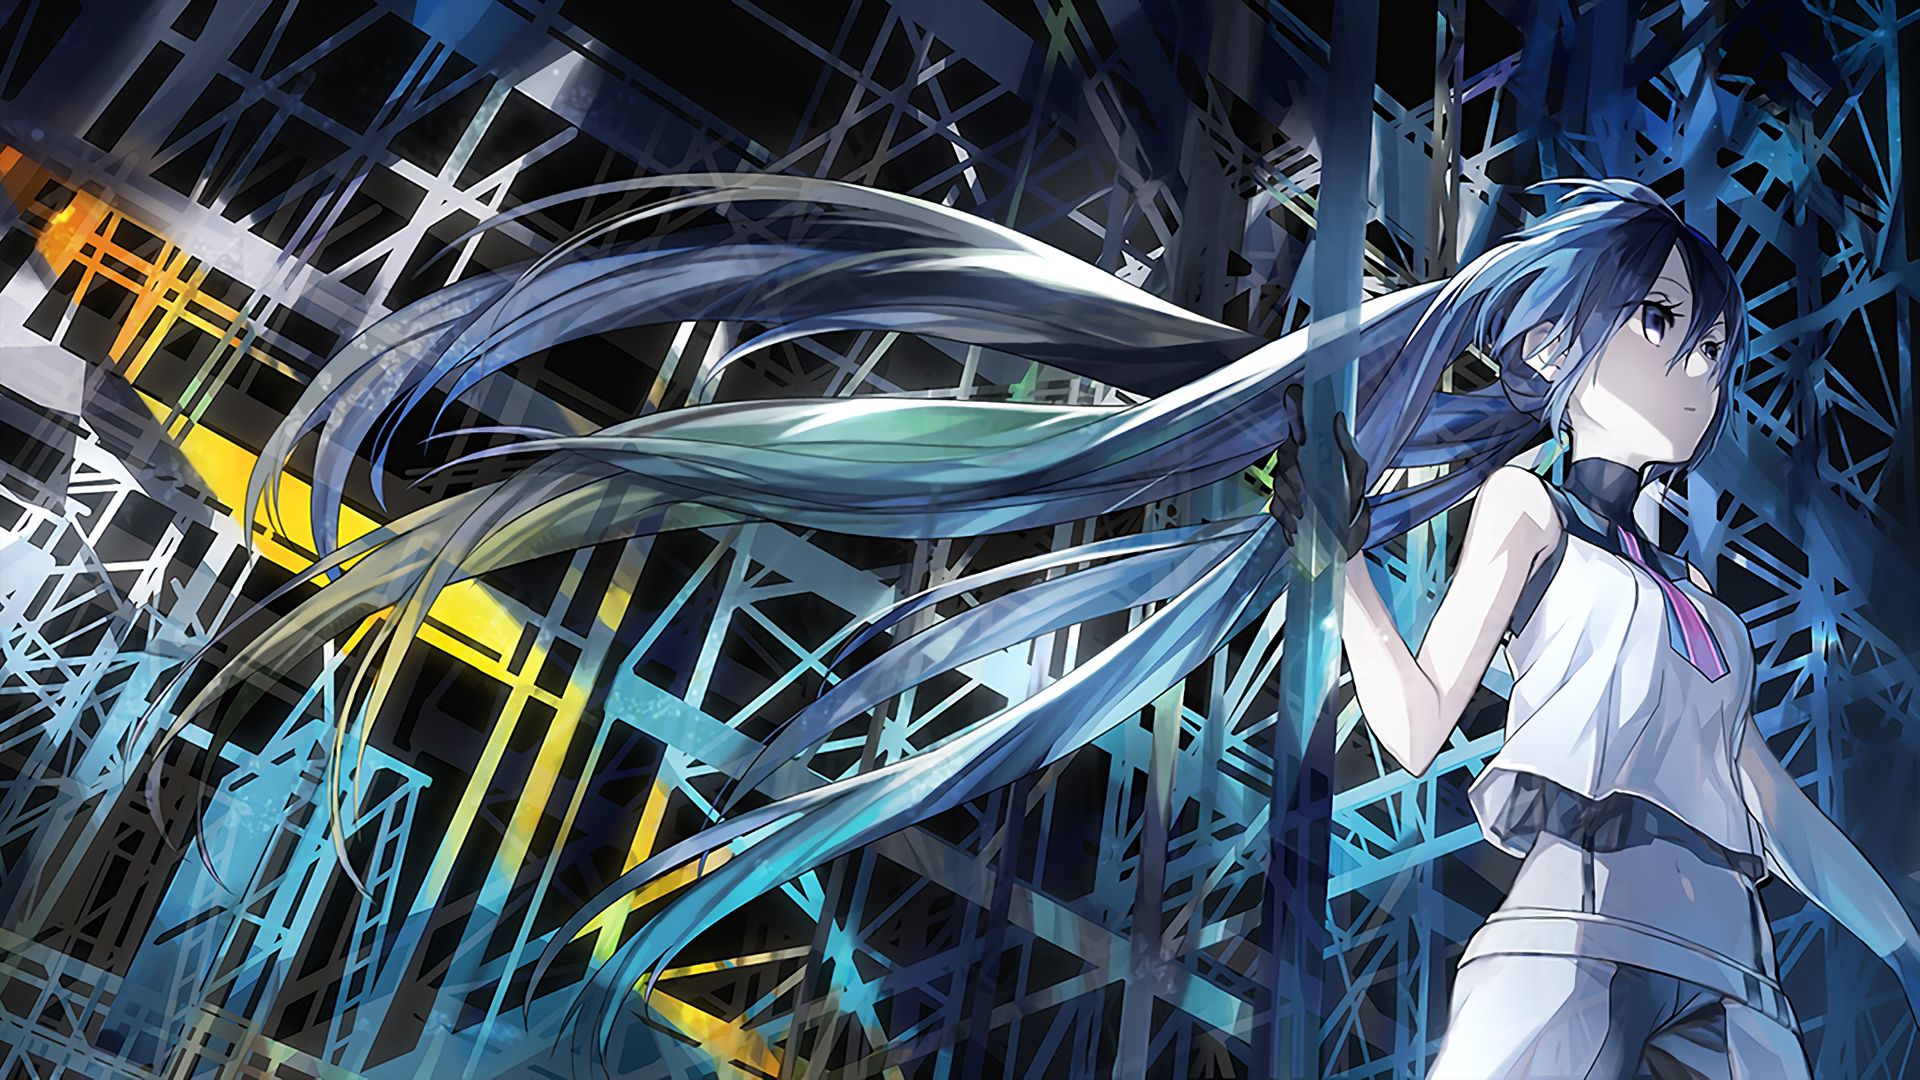 Hatsune 4K wallpapers for your desktop or mobile screen free and